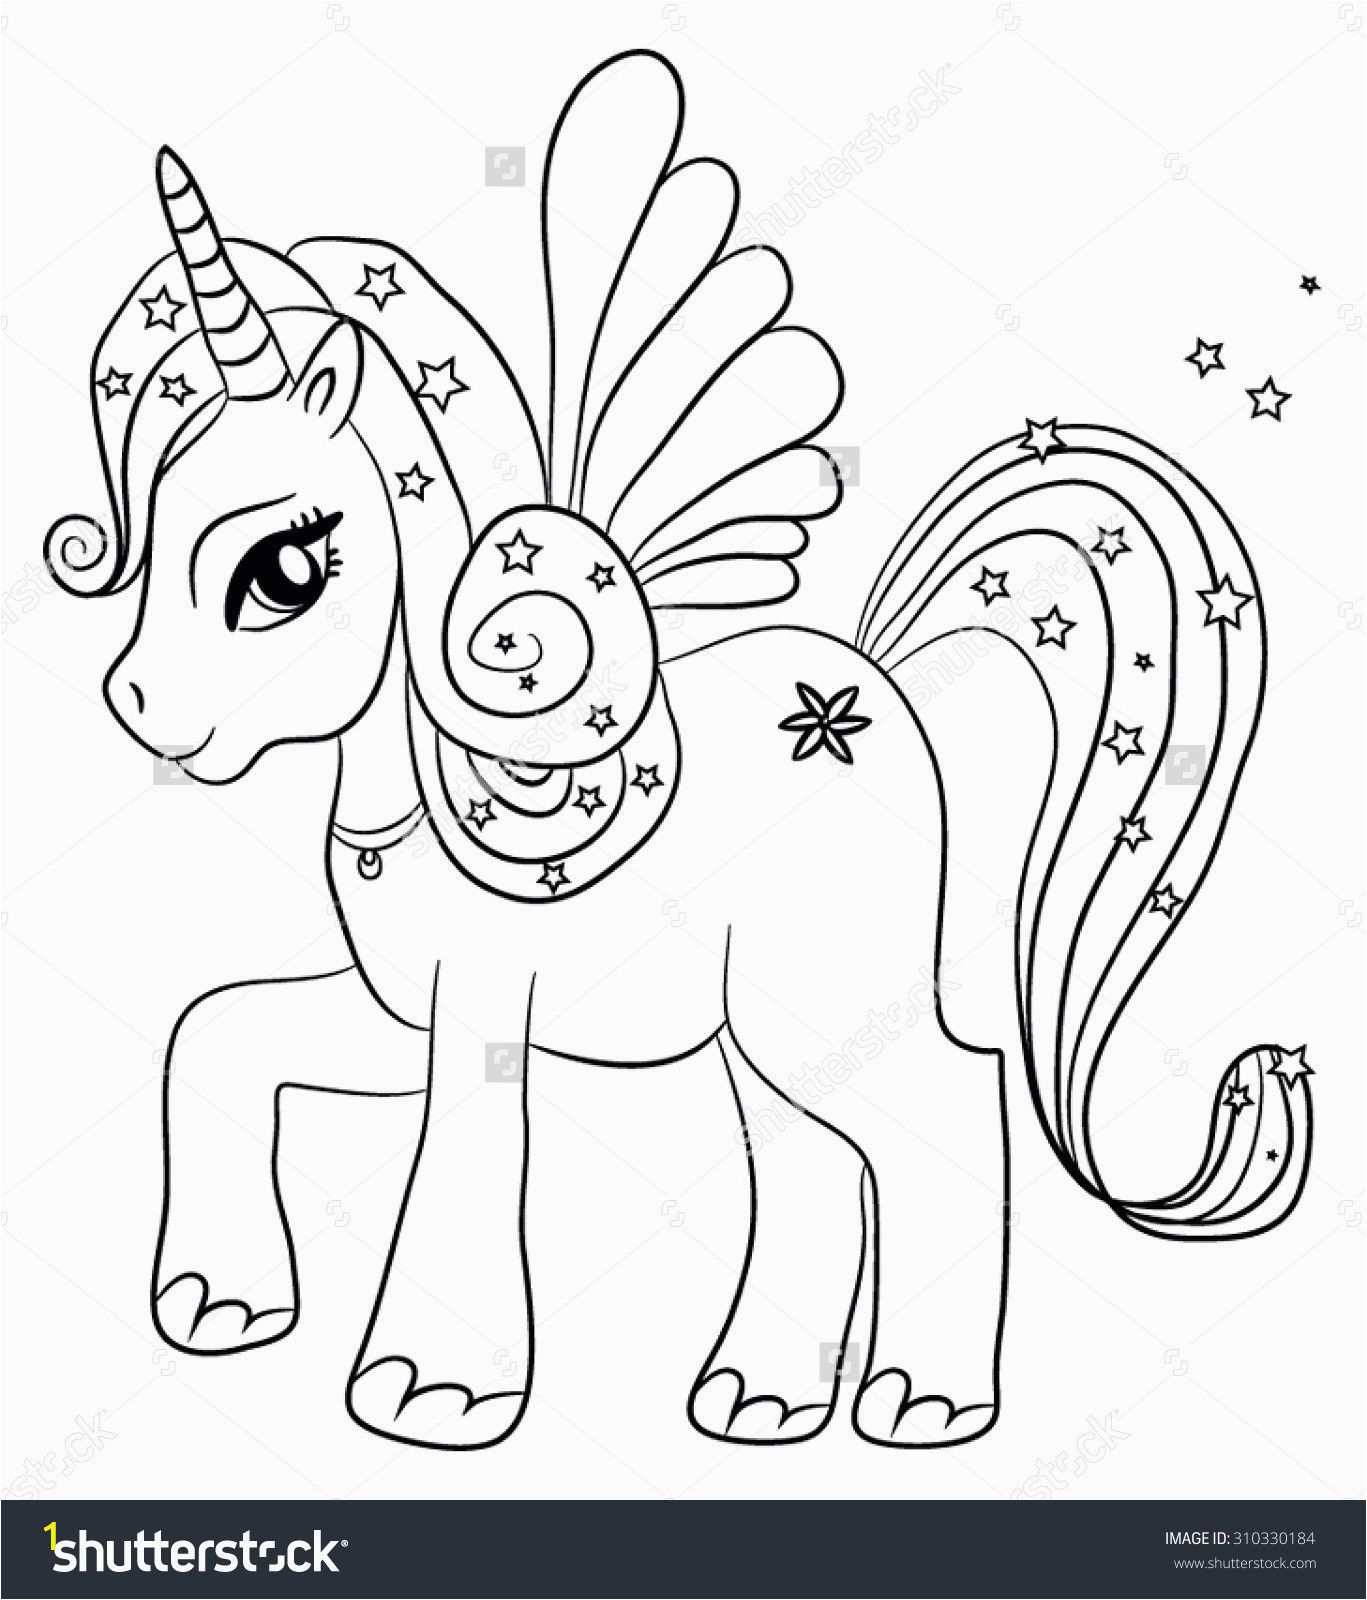 Free Printable Coloring Pages Unicorns Coloring Pages Unicorns Print Saferbrowser Image Search